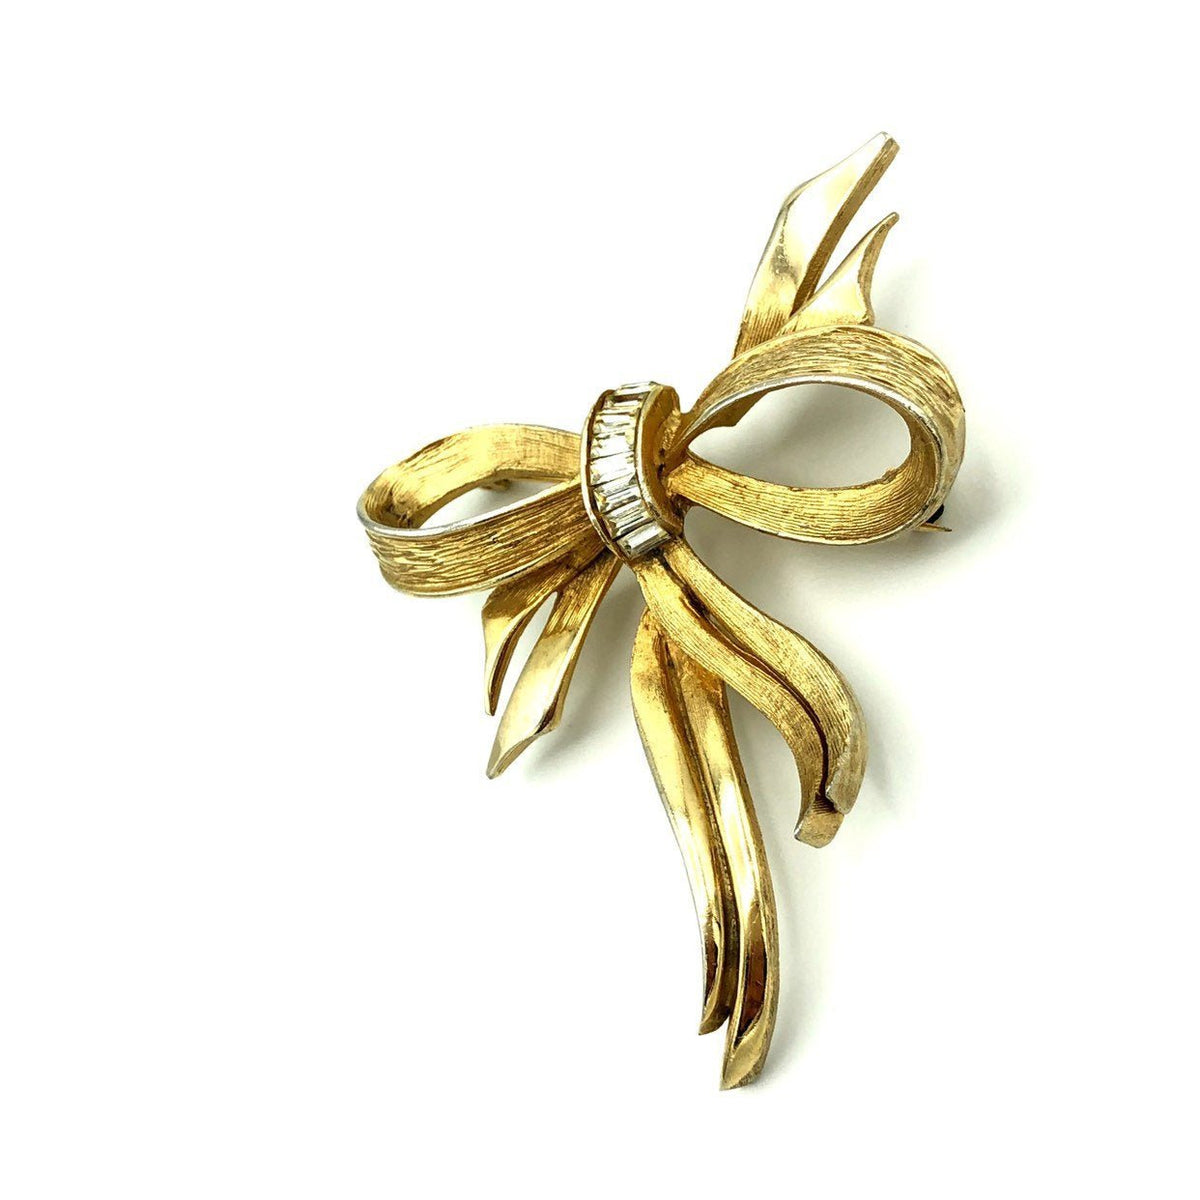 Classic Pell Gold Bow Ribbon Brooch - 24 Wishes Vintage Jewelry